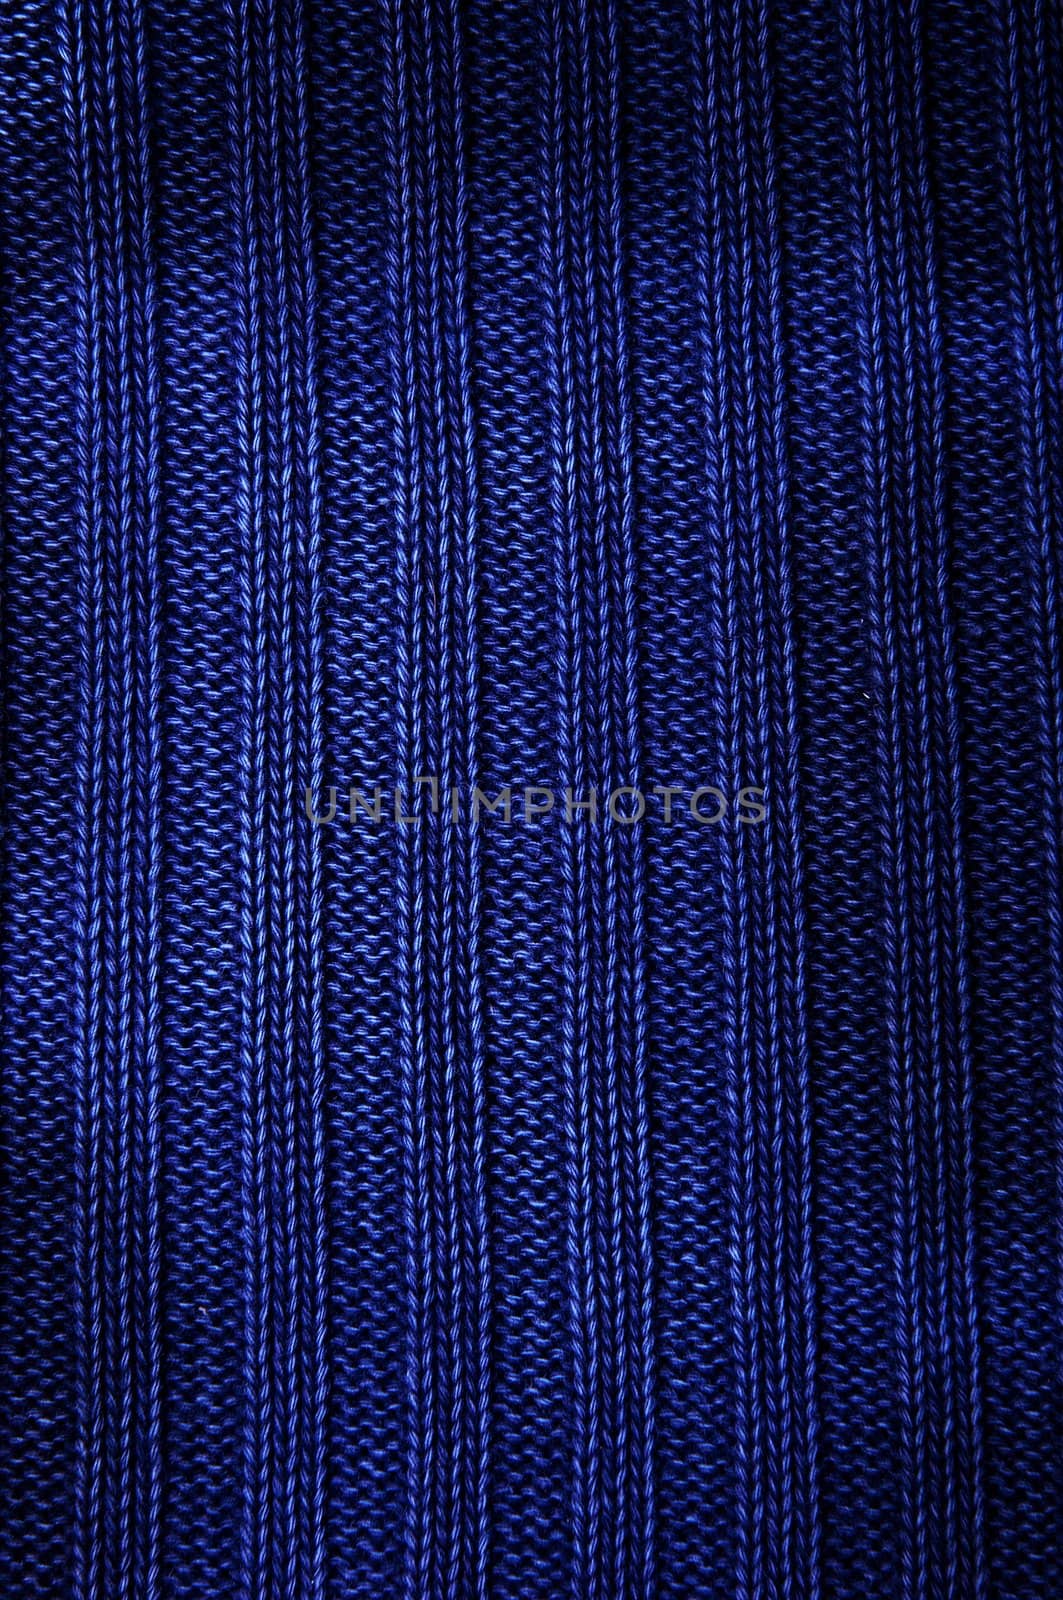 Texture fabric of dark blue color. Vertical by LeksusTuss